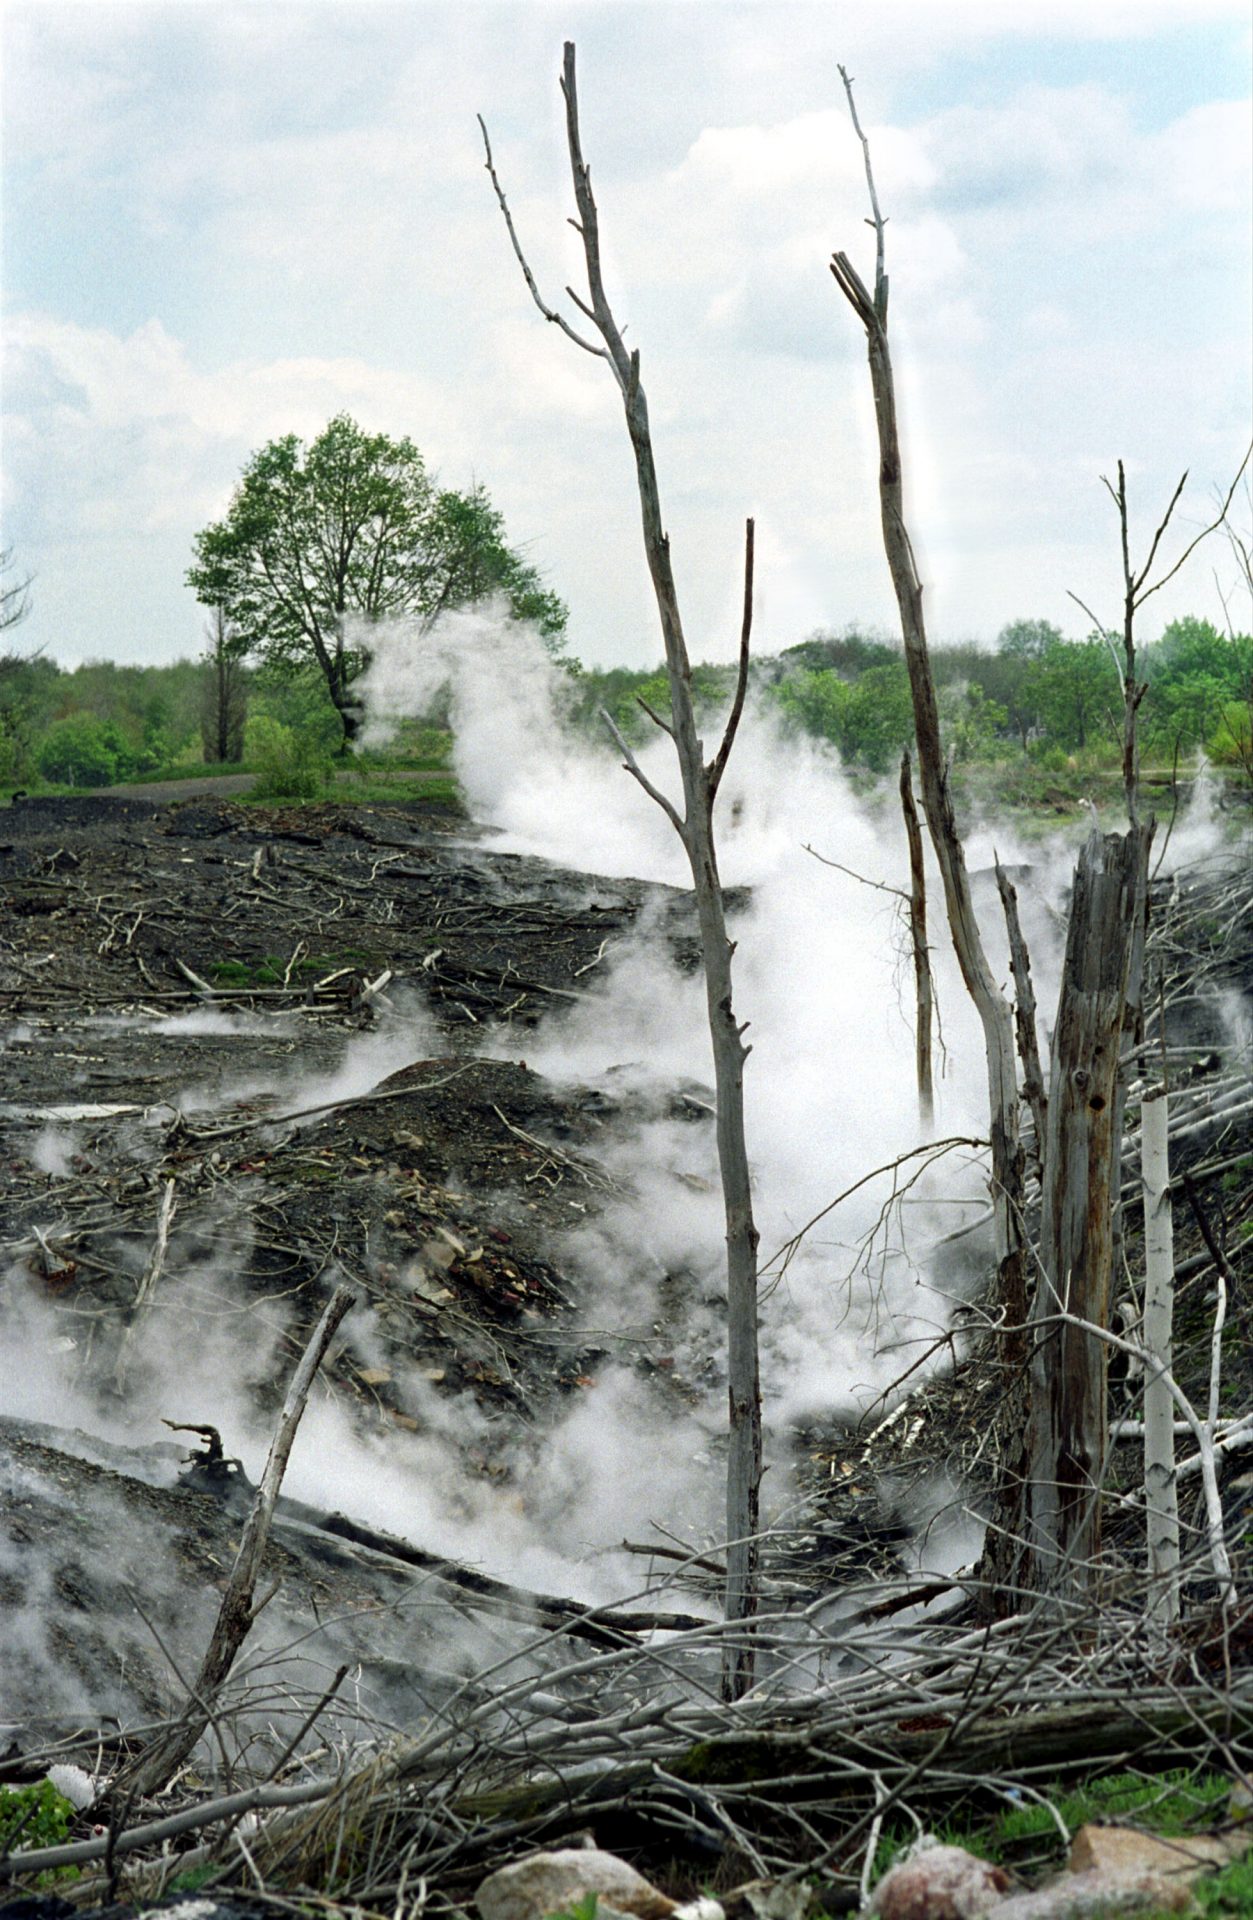 Steam rises from the Centralia mine fire in the area where the fire is close to the surface on May 24, 2002. The fire started in 1962.